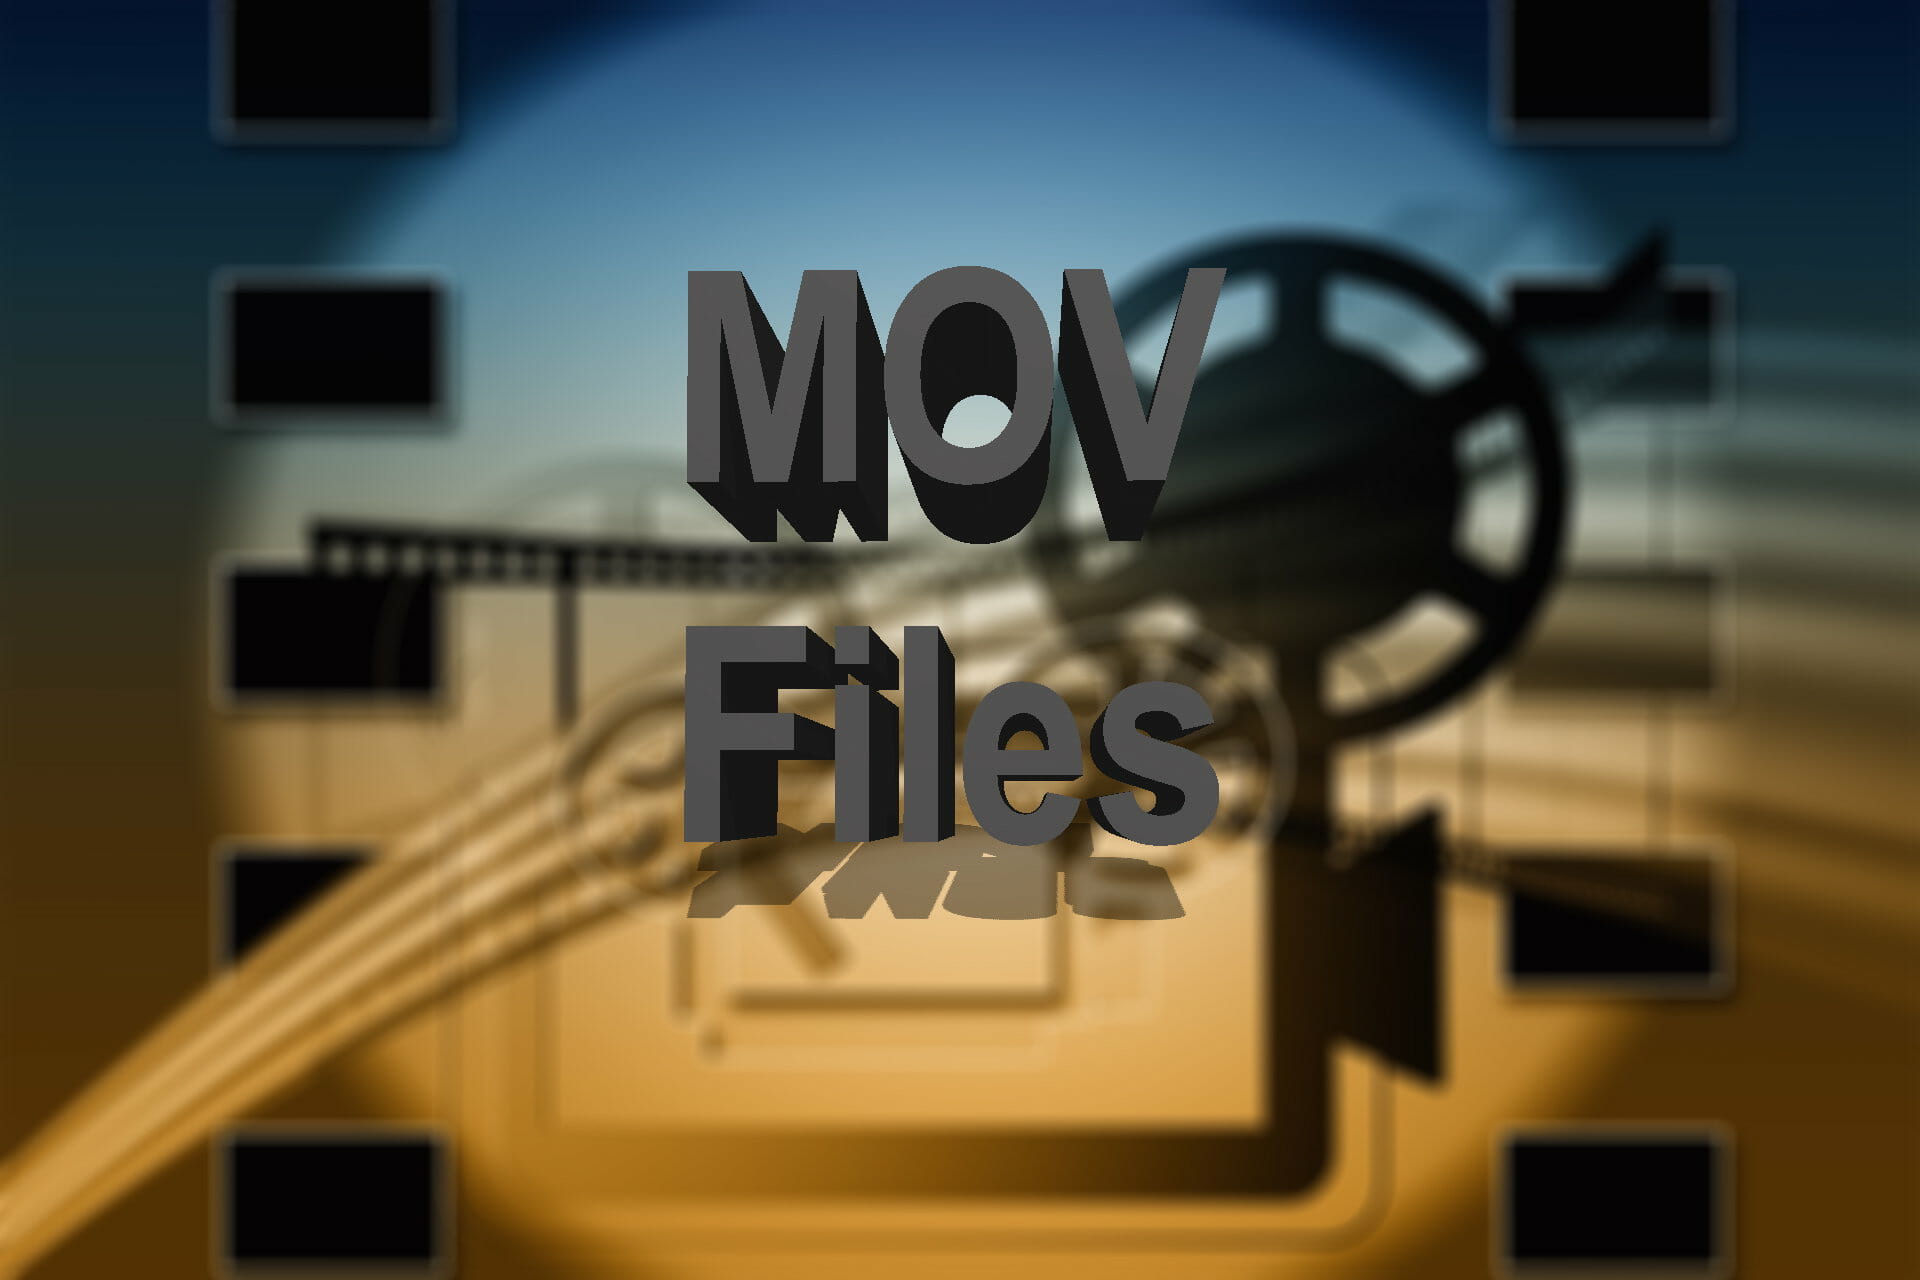 Best software to repair MOV files